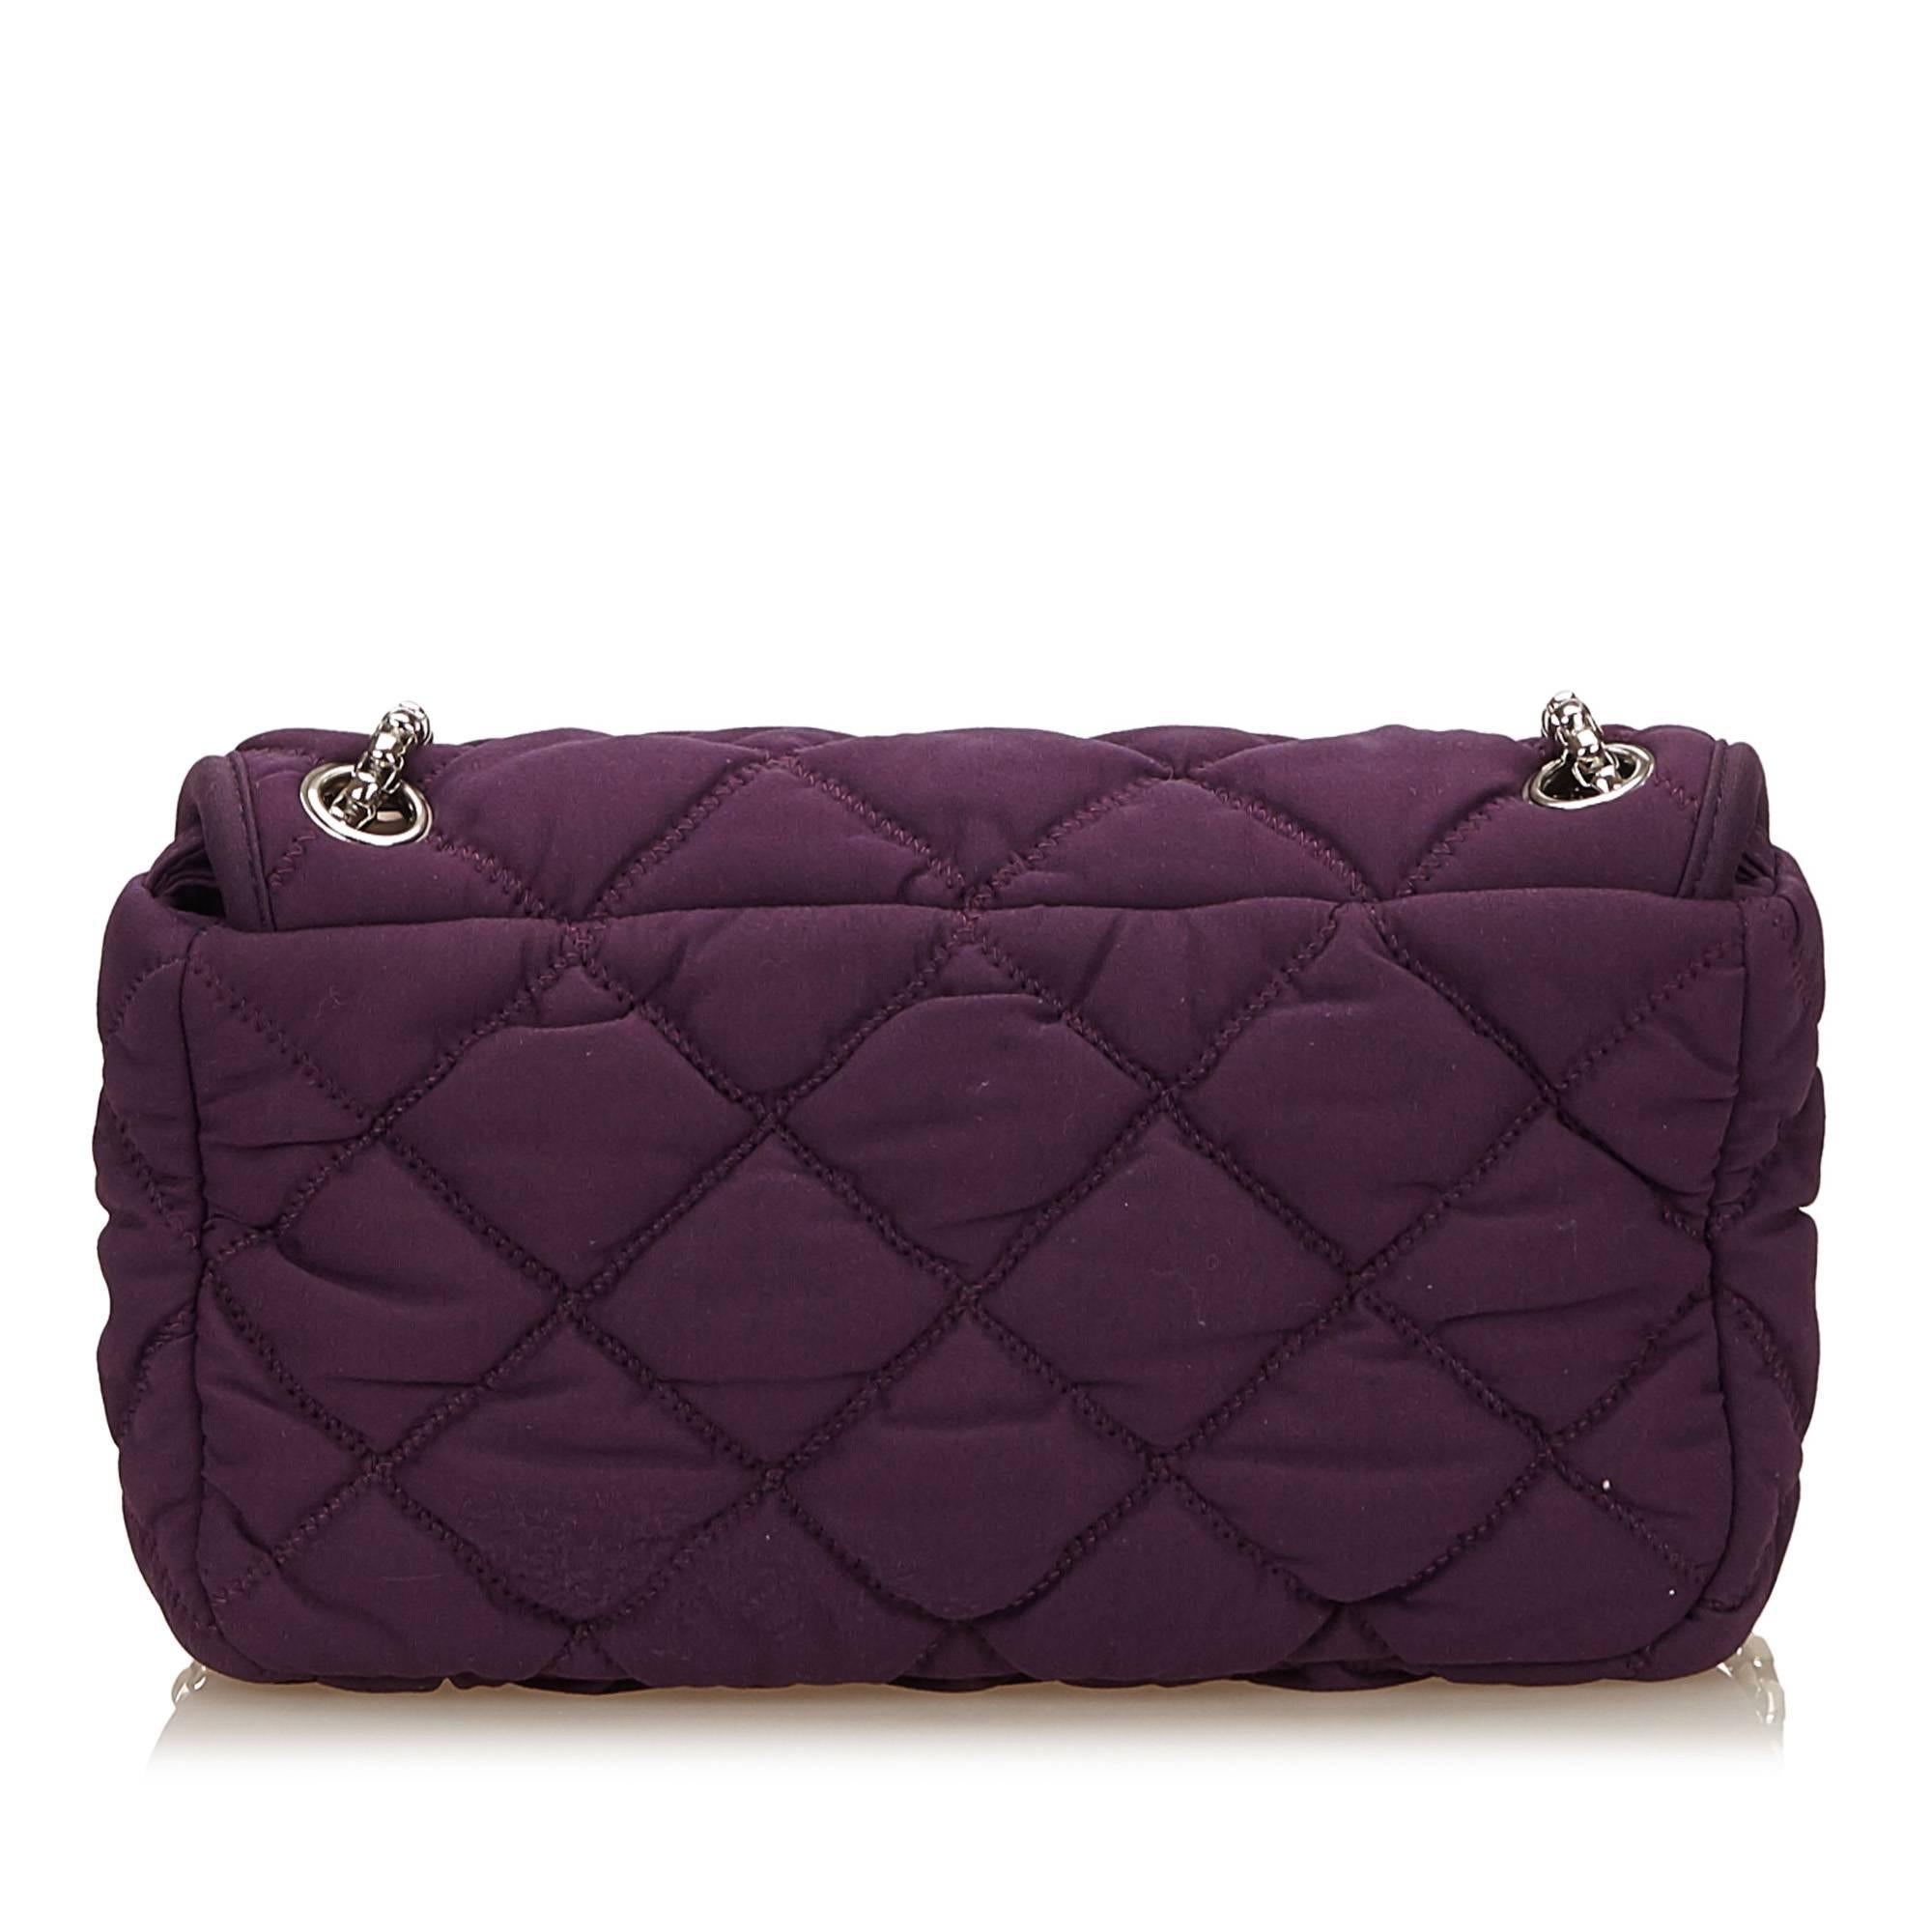 - This Chanel Matelasse style purple bubble shoulder bag features a nylon body, nylon and silver chain shoulder straps, flap top with silver interlocking "CC", and interior zip pocket. Love the purple colour in Chanel, its unusual and easy